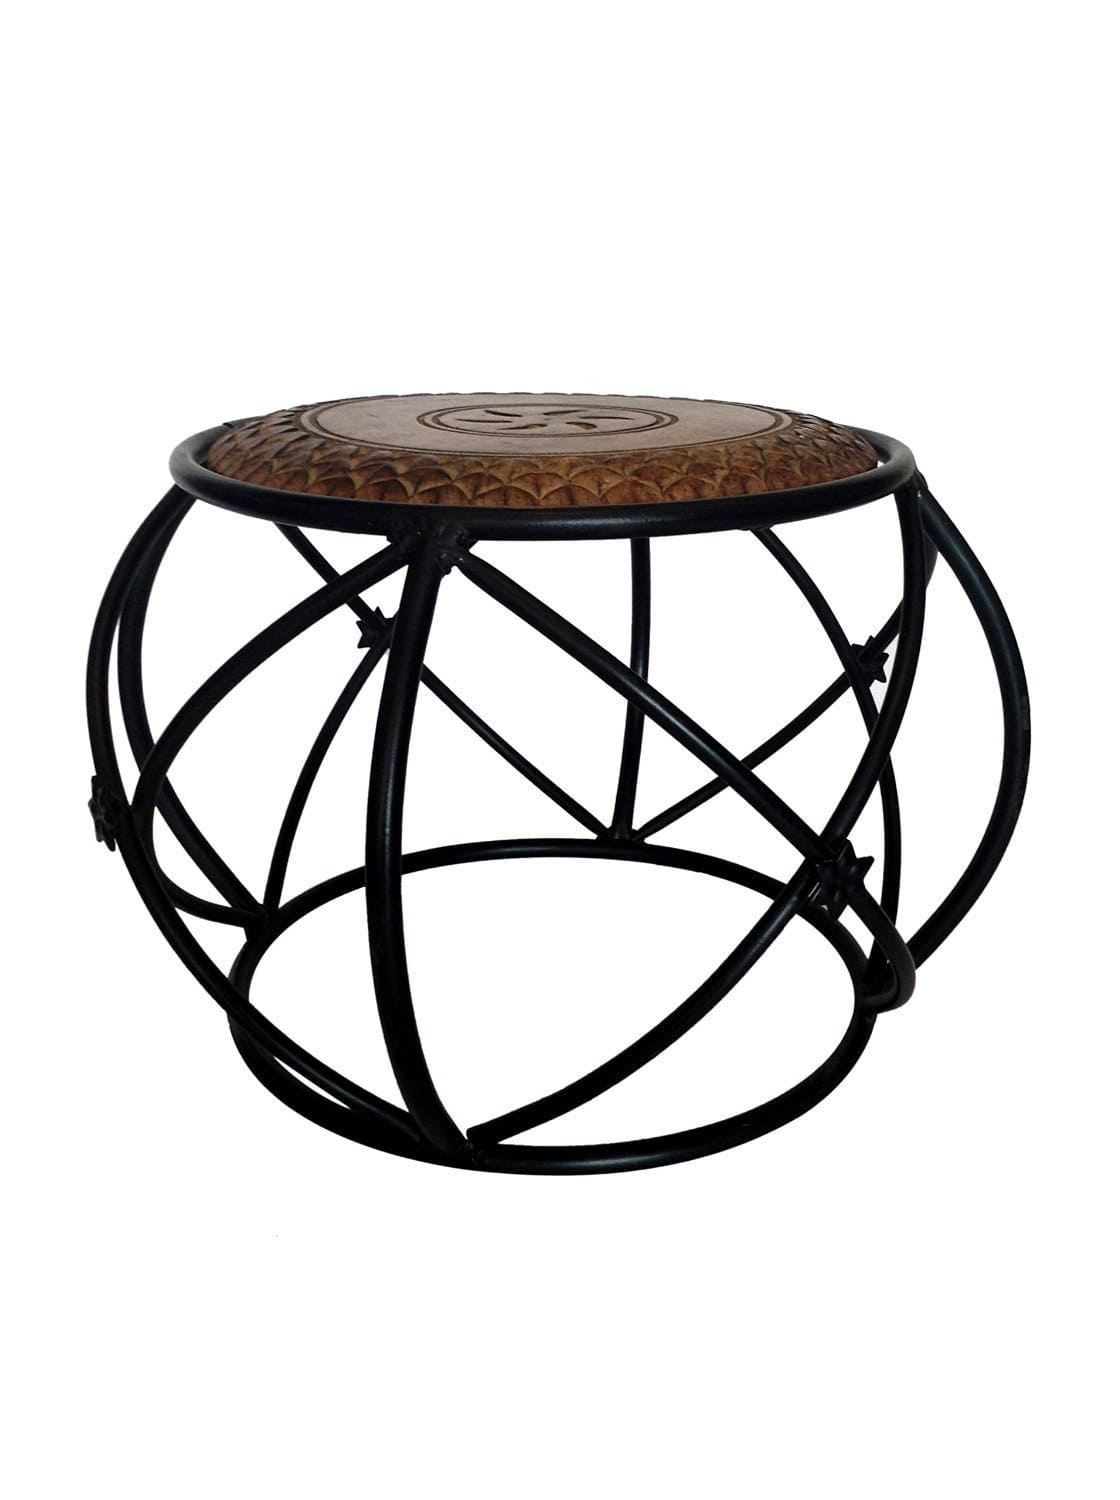 Wooden & Iron Stool/Table Home Decor Size(LxBxH-13x13x12) Inch